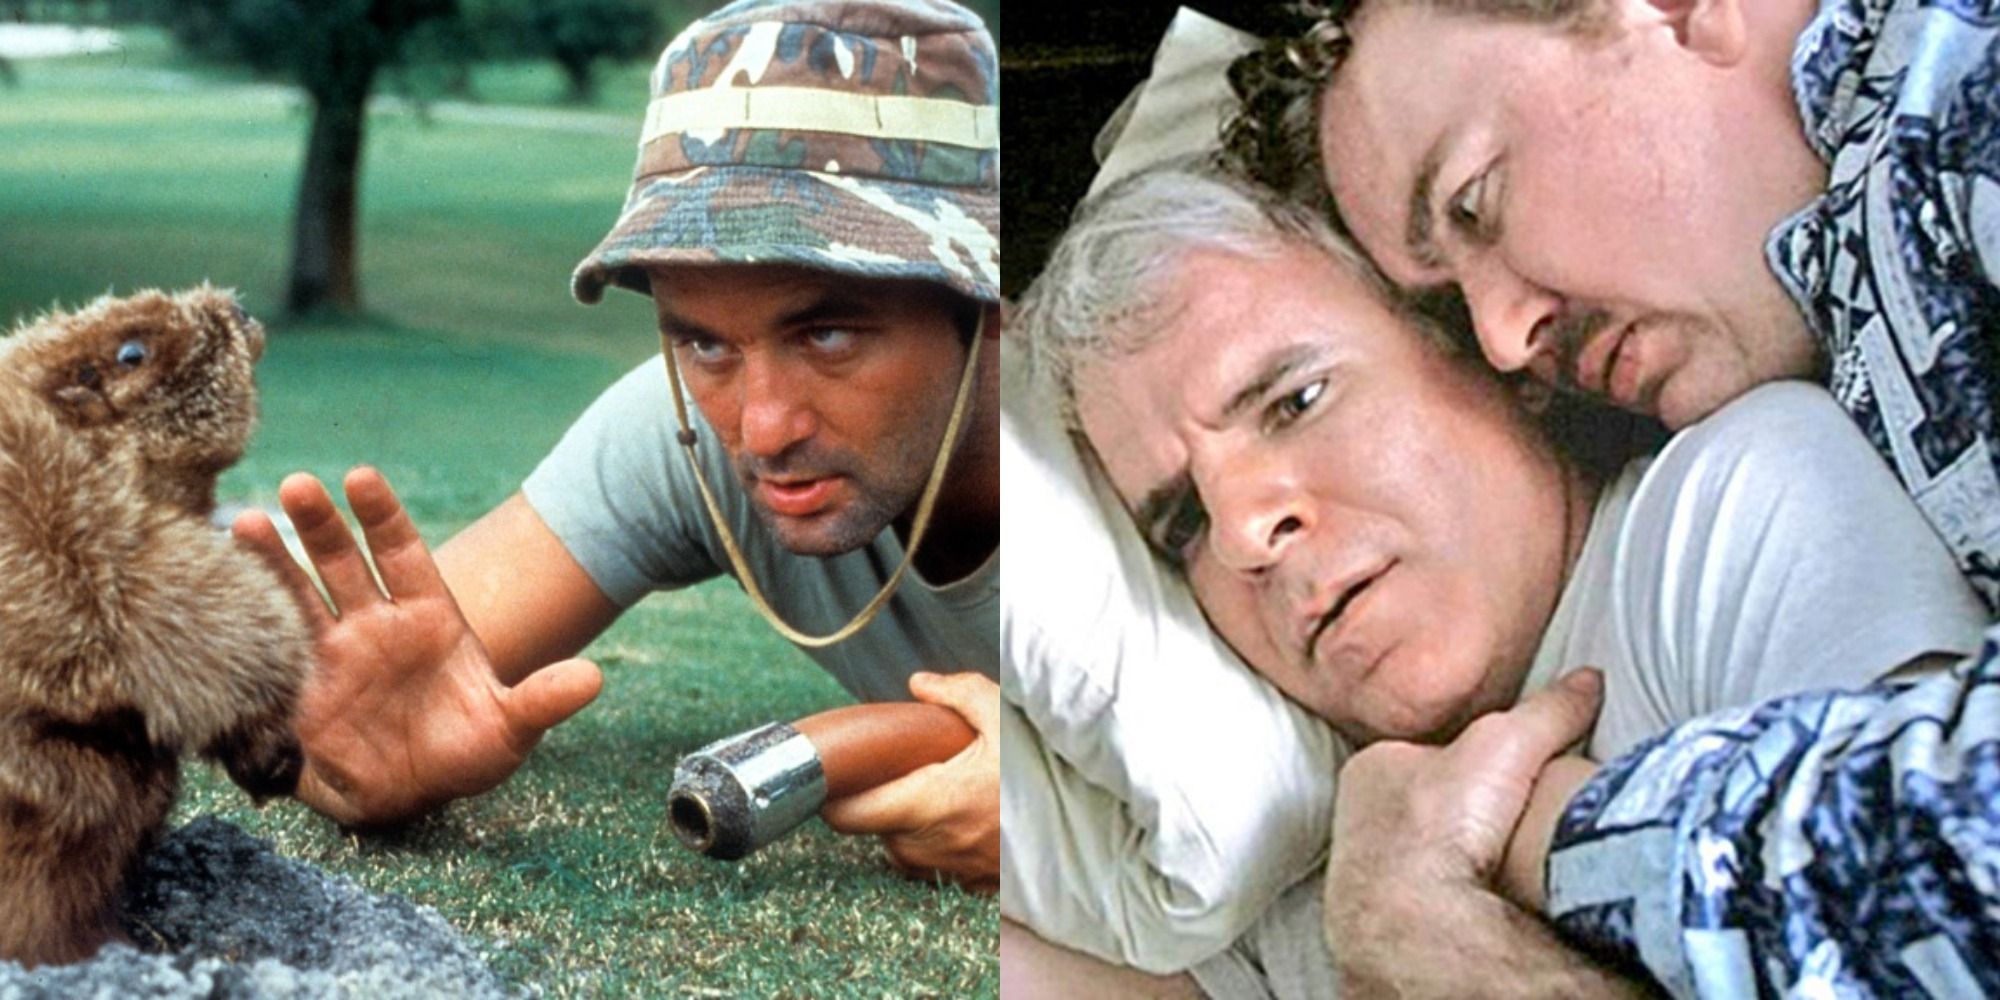 10 Best Comedies Of All Time According To Ranker